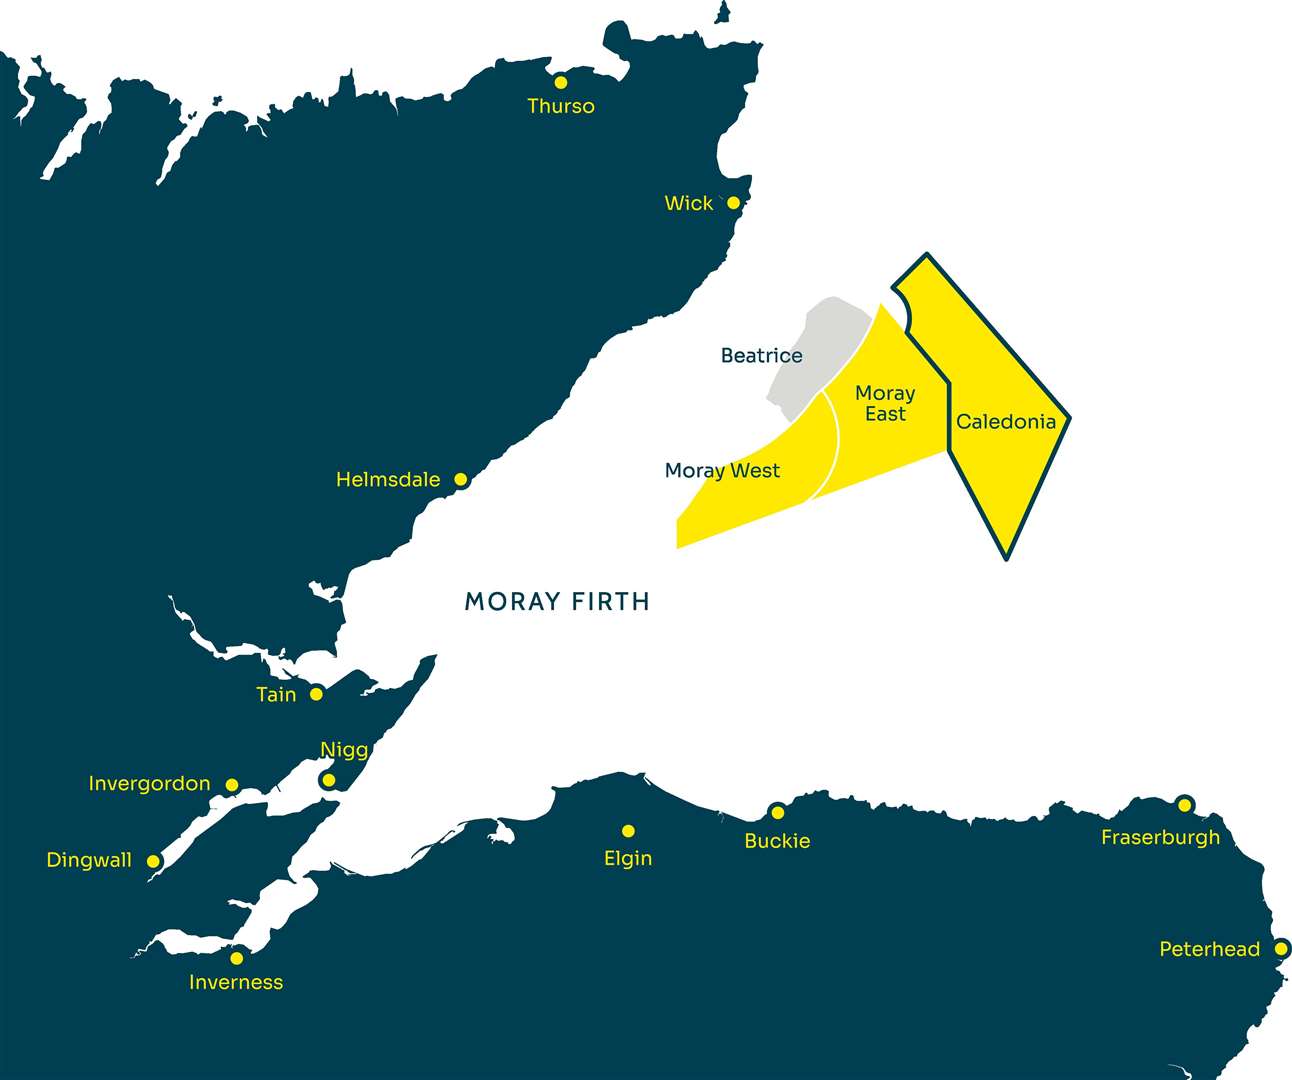 Plans to construct the Caledonia offshore wind farm will form the basis of a public consultation event in Buckie later this week.